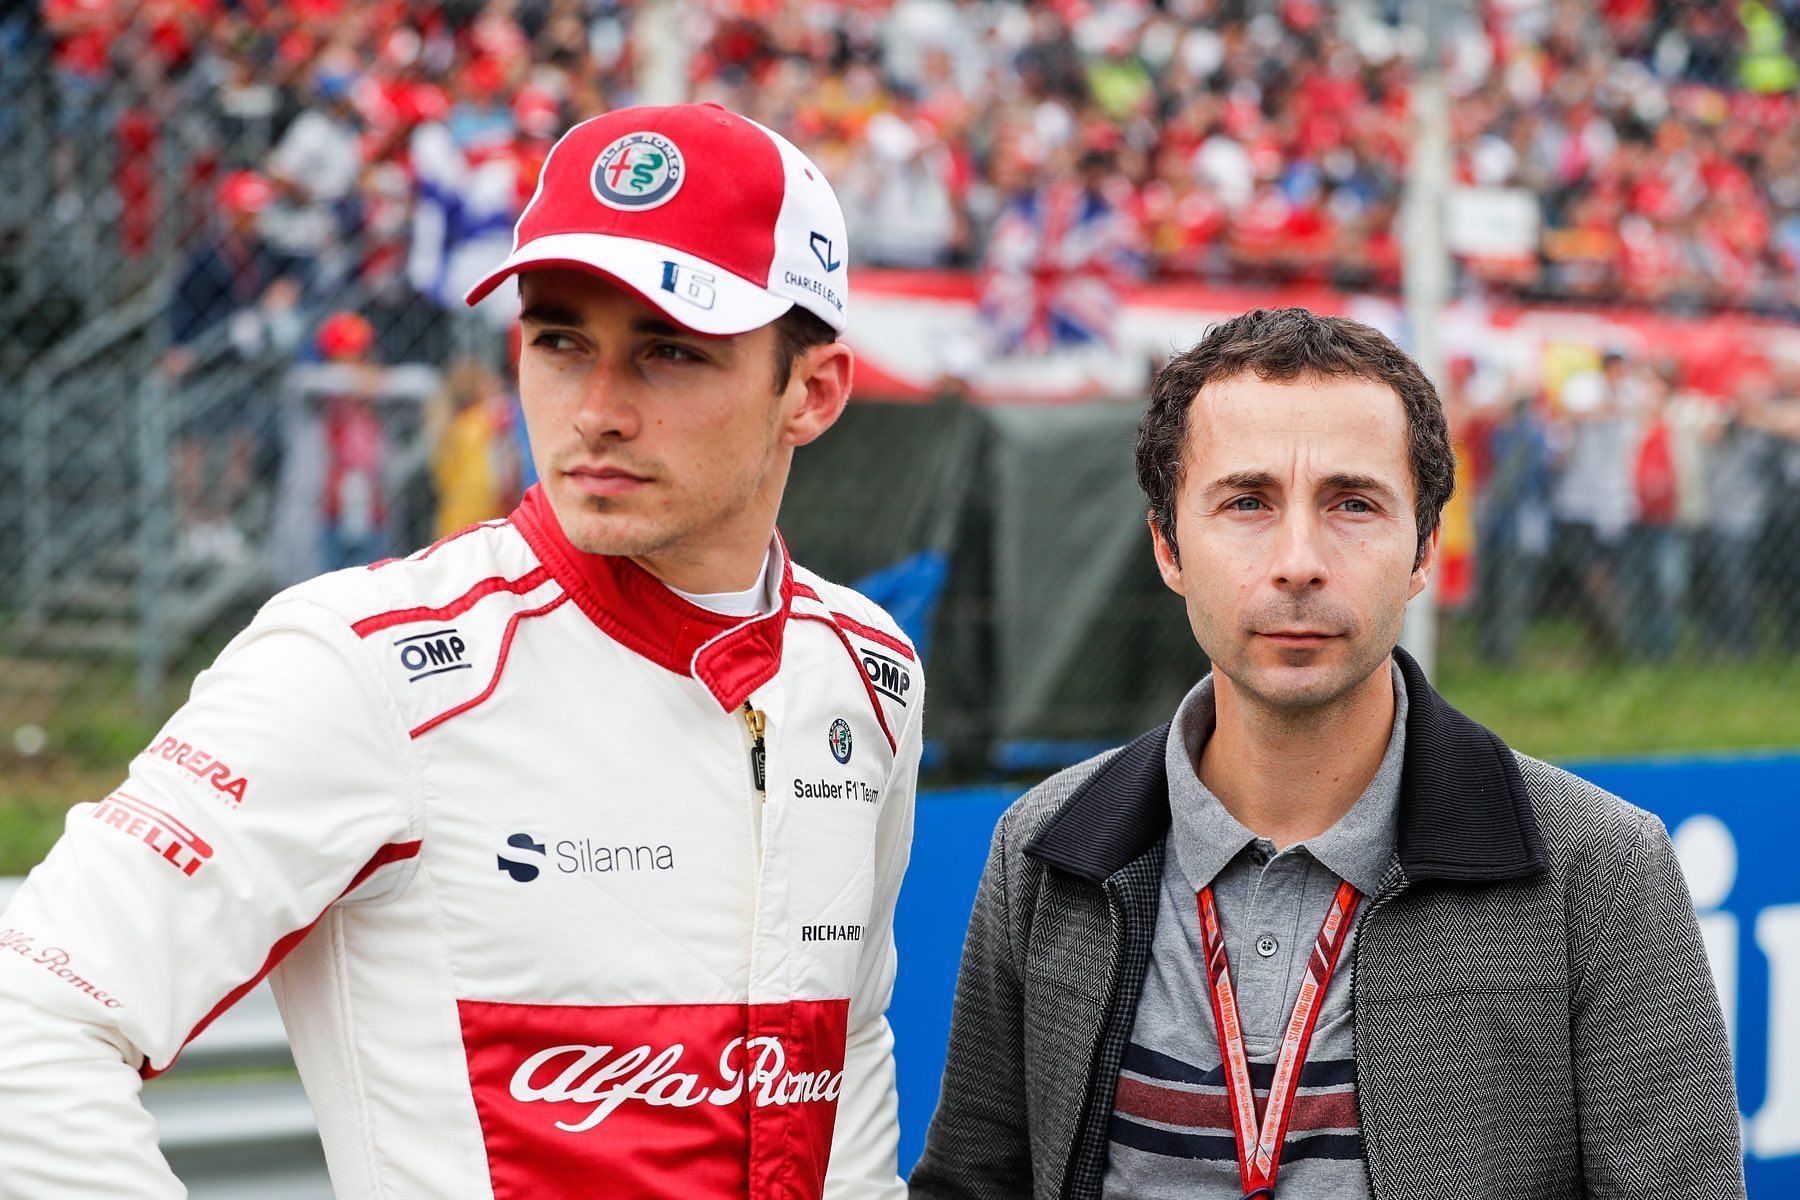 Charles Leclerc and Nicholas Todt